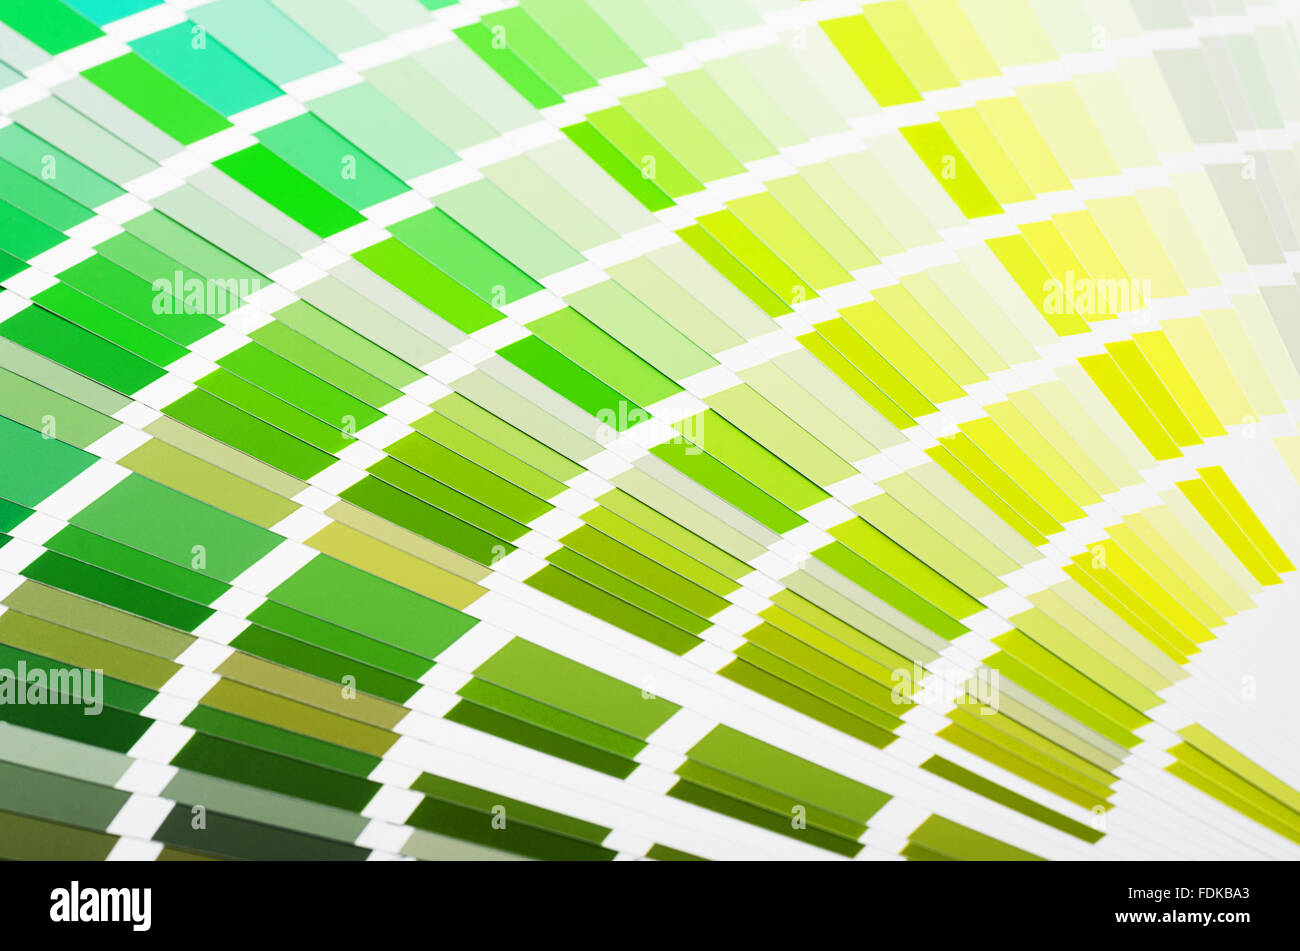 Green and yellow colors fan guide Stock Photo